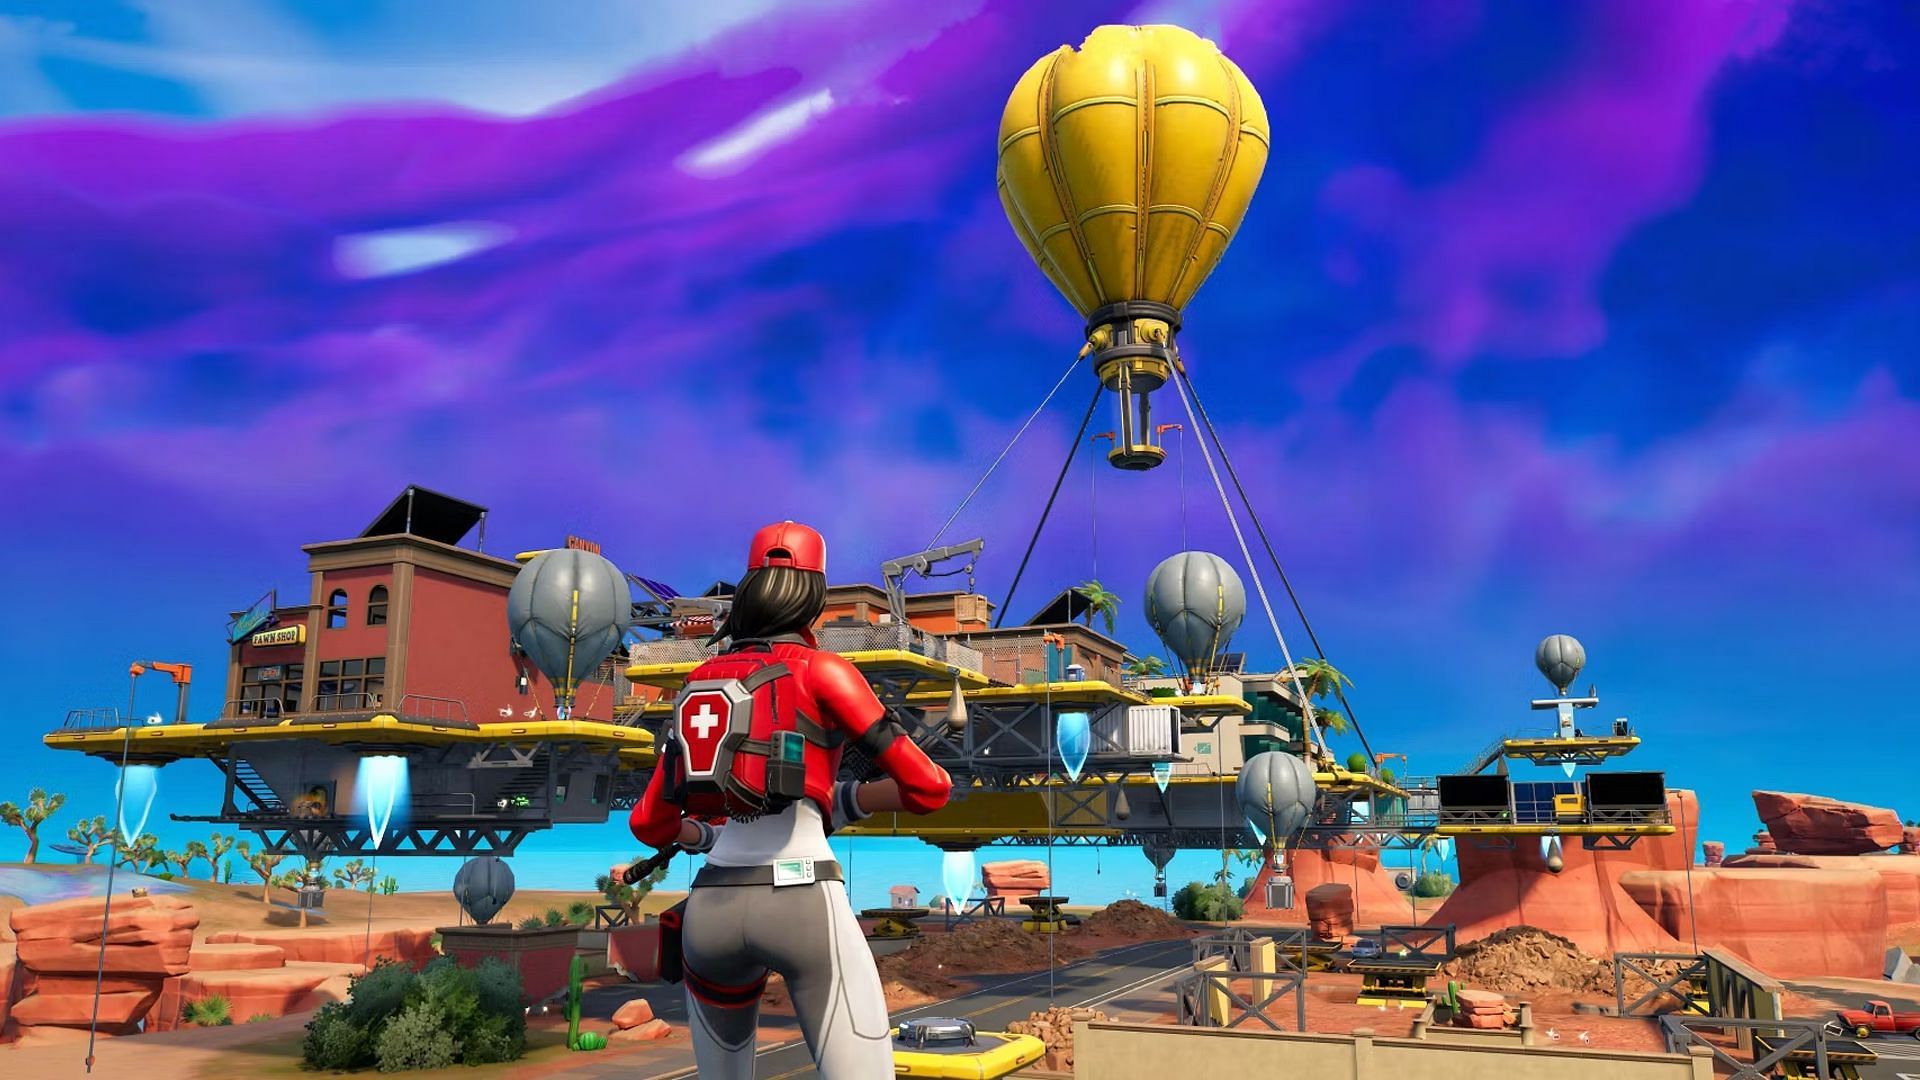 The location has numerous hot air balloons that keep it floating (Image via Epic Games)